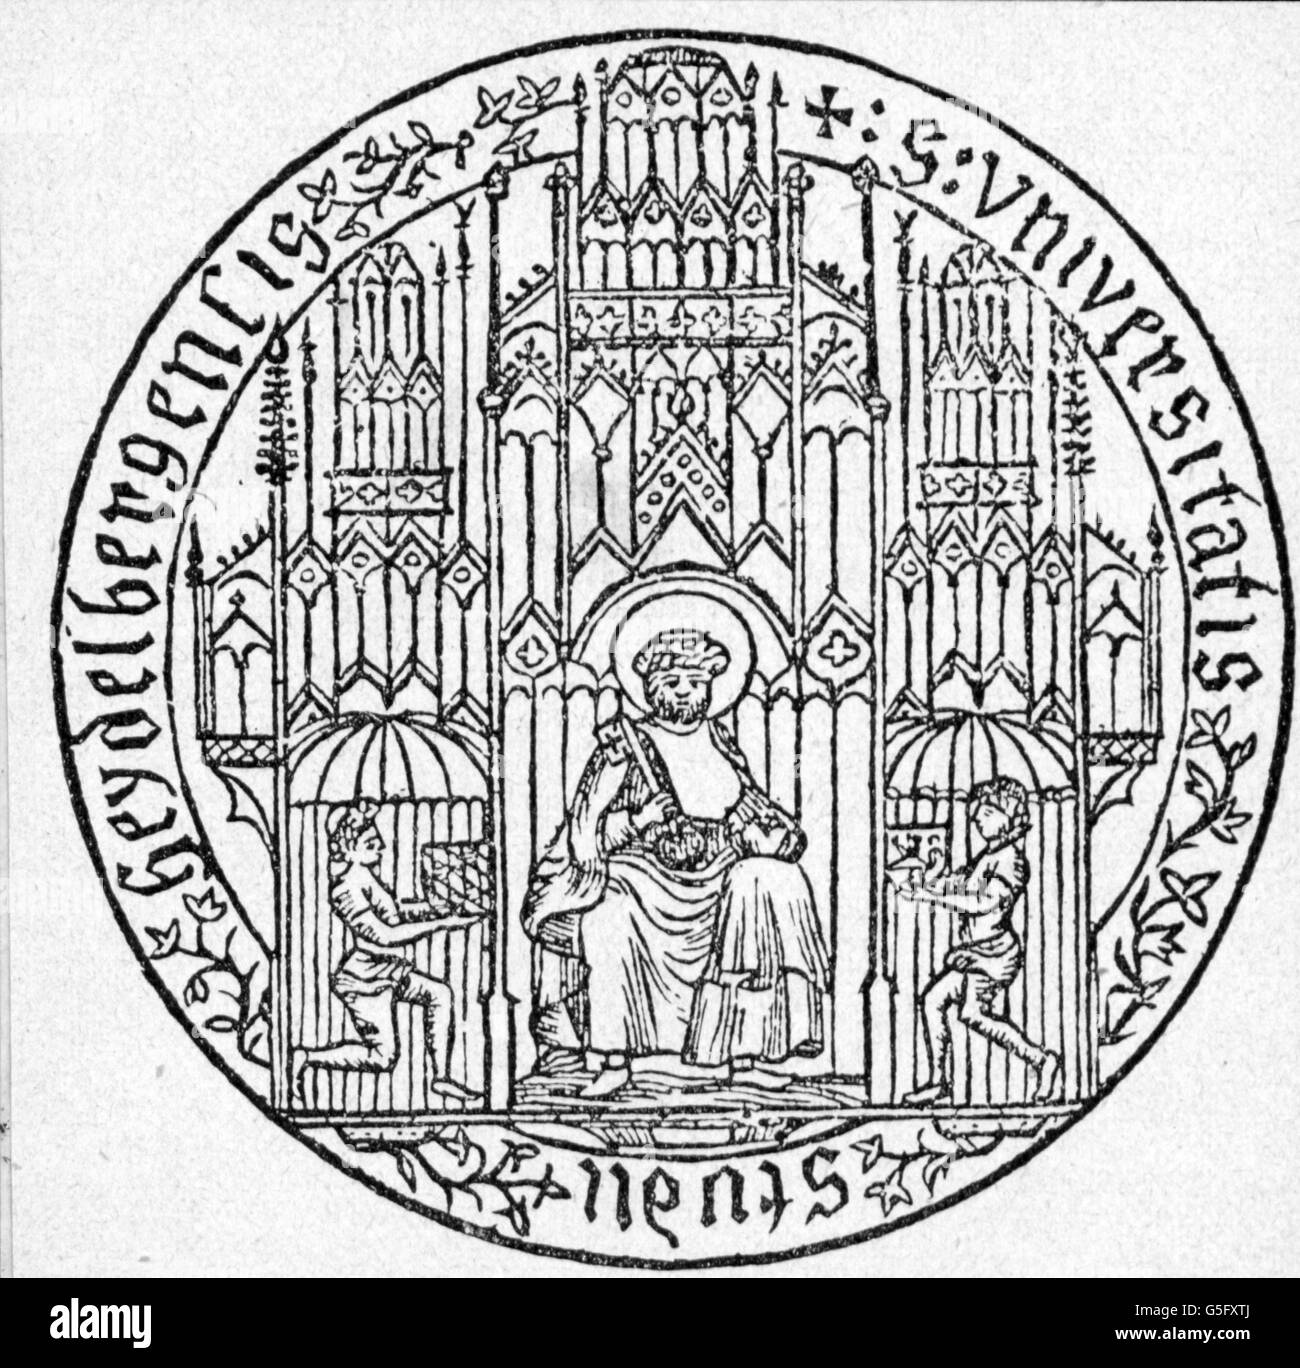 pedagogy, university, seal, Heidelberg, woodcut, 15th century, 15th century, Middle Ages, medieval, mediaeval, graphic, graphics, Germany, symbol, symbols, supporter, supporters, Saint Peter, Saint, Christianity, religion, religions, holding, hold, keys, key, coat of arms, pedagogy, paedagogy, education, university, universities, woodcut, woodcuts, historic, historical, people, Additional-Rights-Clearences-Not Available Stock Photo